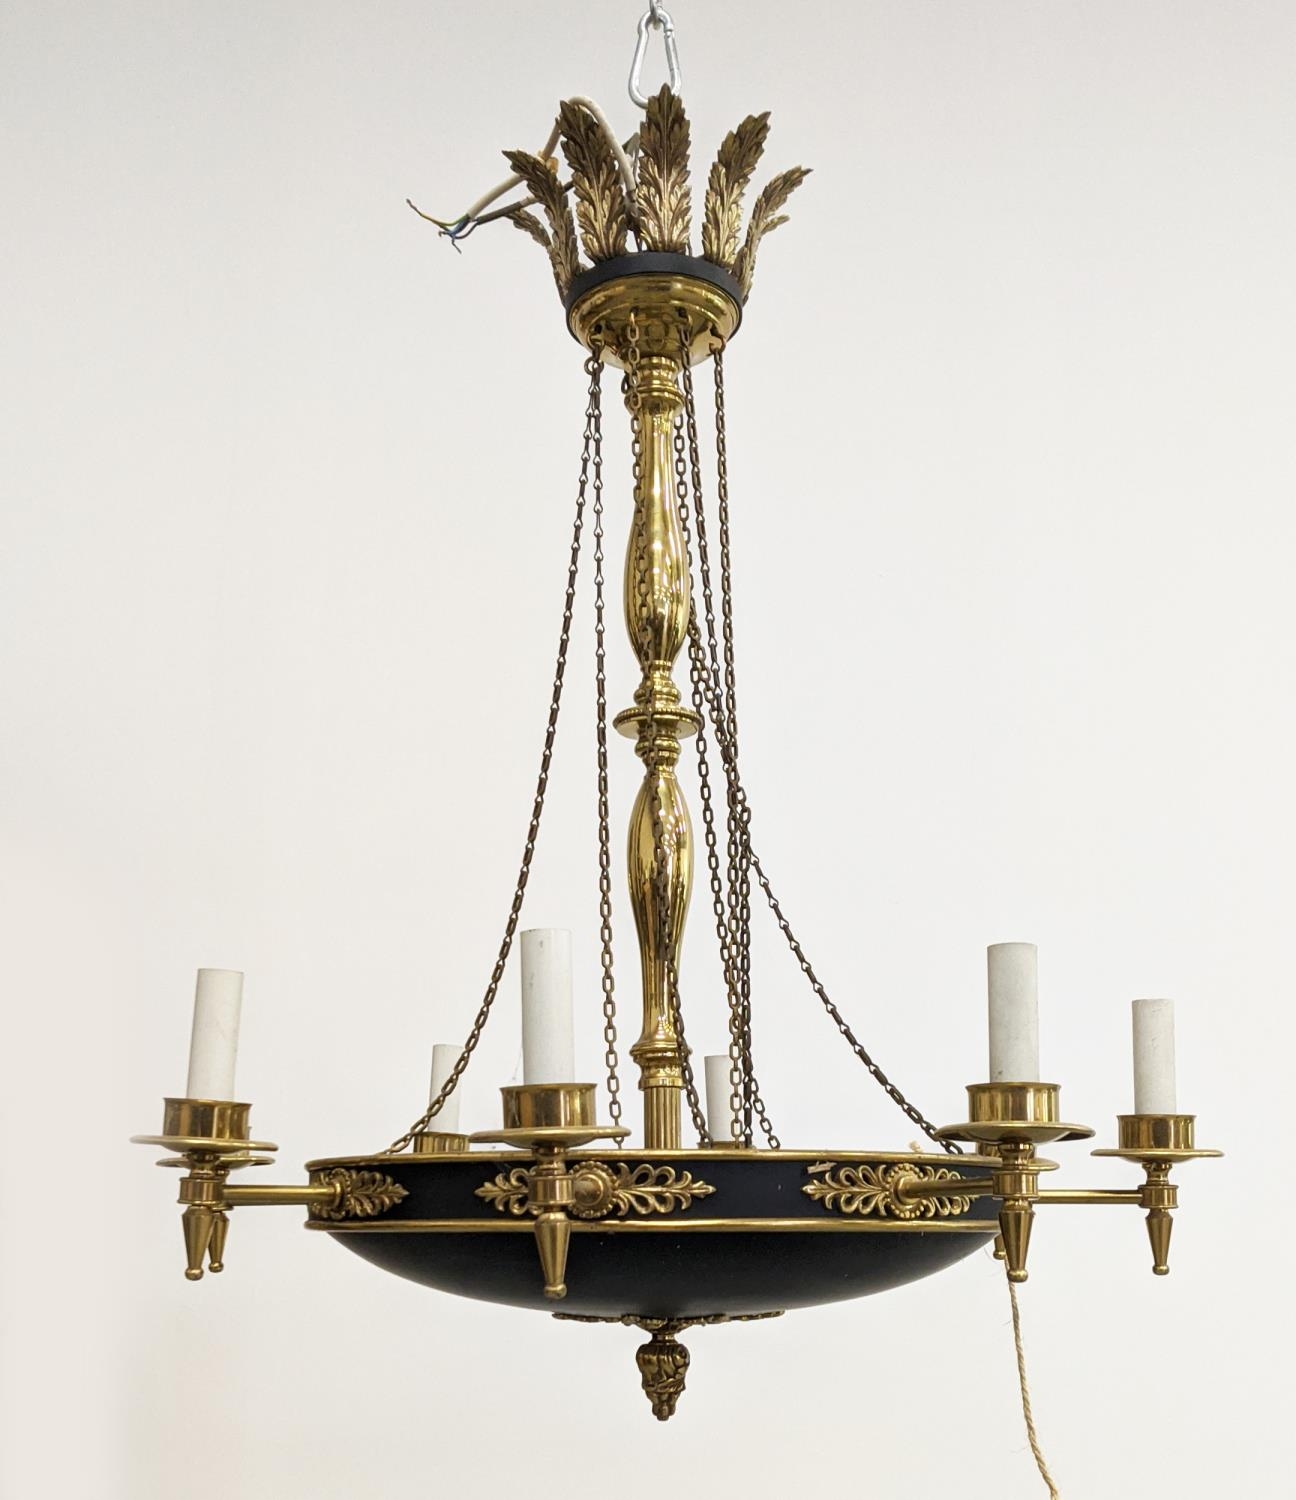 CEILING LIGHT EMPIRE STYLE, black metal and brass with acanthus leaf detail, 77cm W x 96cm H approx. - Image 3 of 14